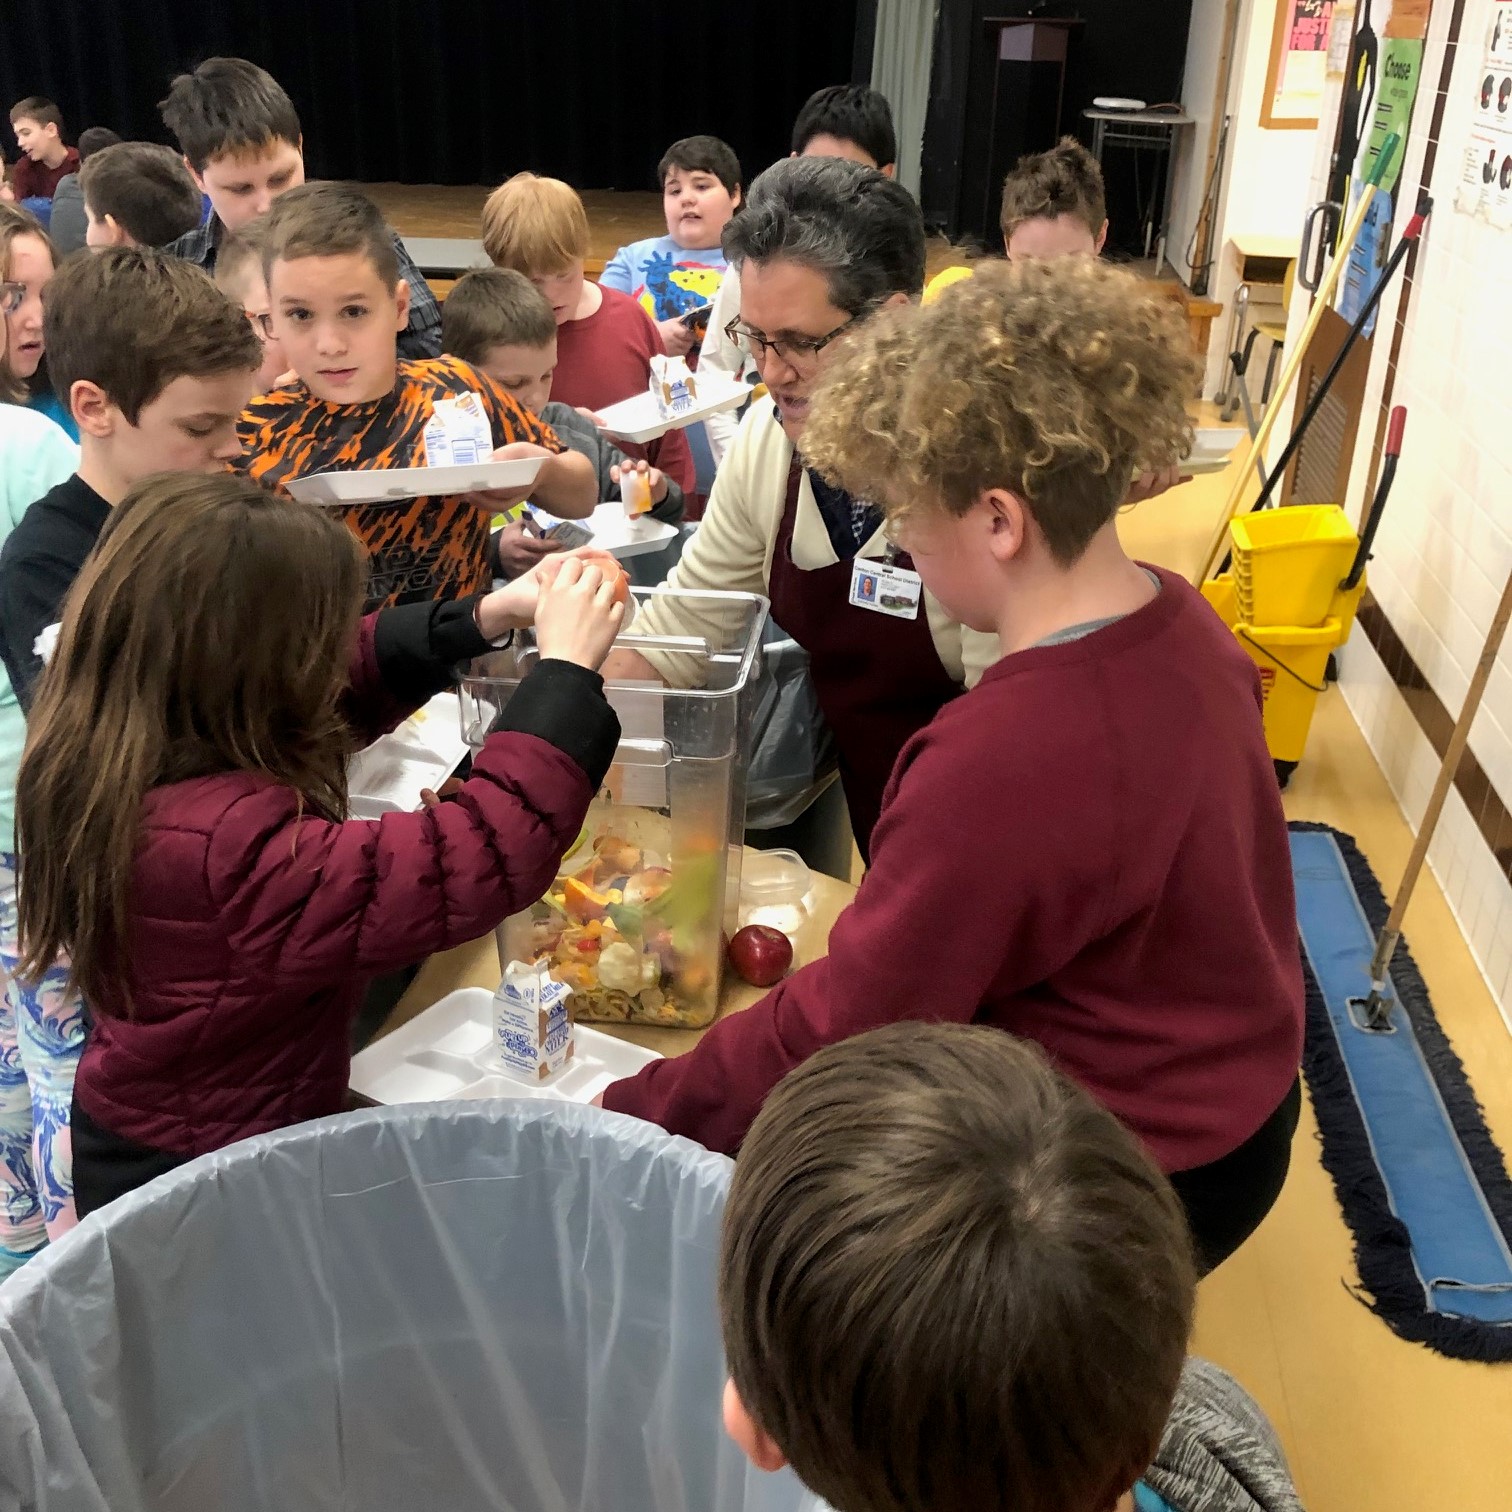 Middle school students sorting their food waste with the help of a CCE employee